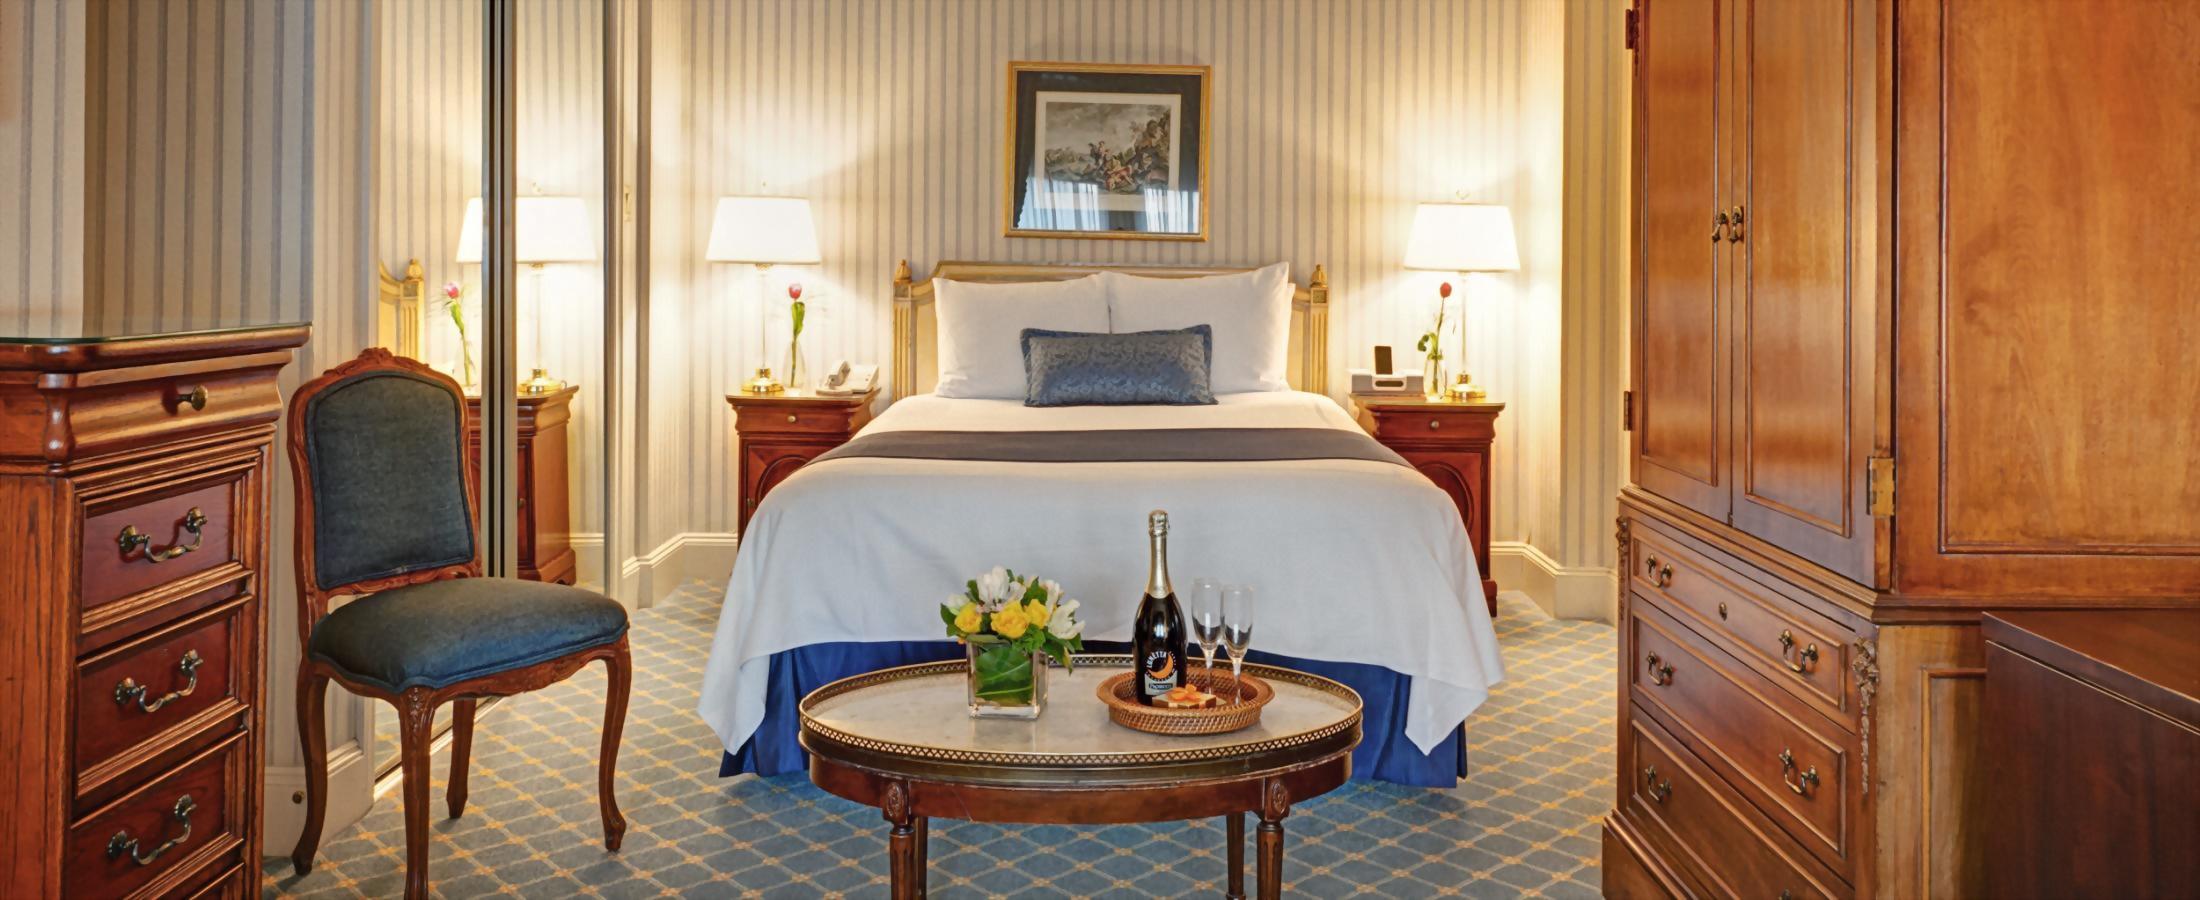 Deluxe Queen Room at Hotel Elysée has one queen bed and is approximately 300 square feet.